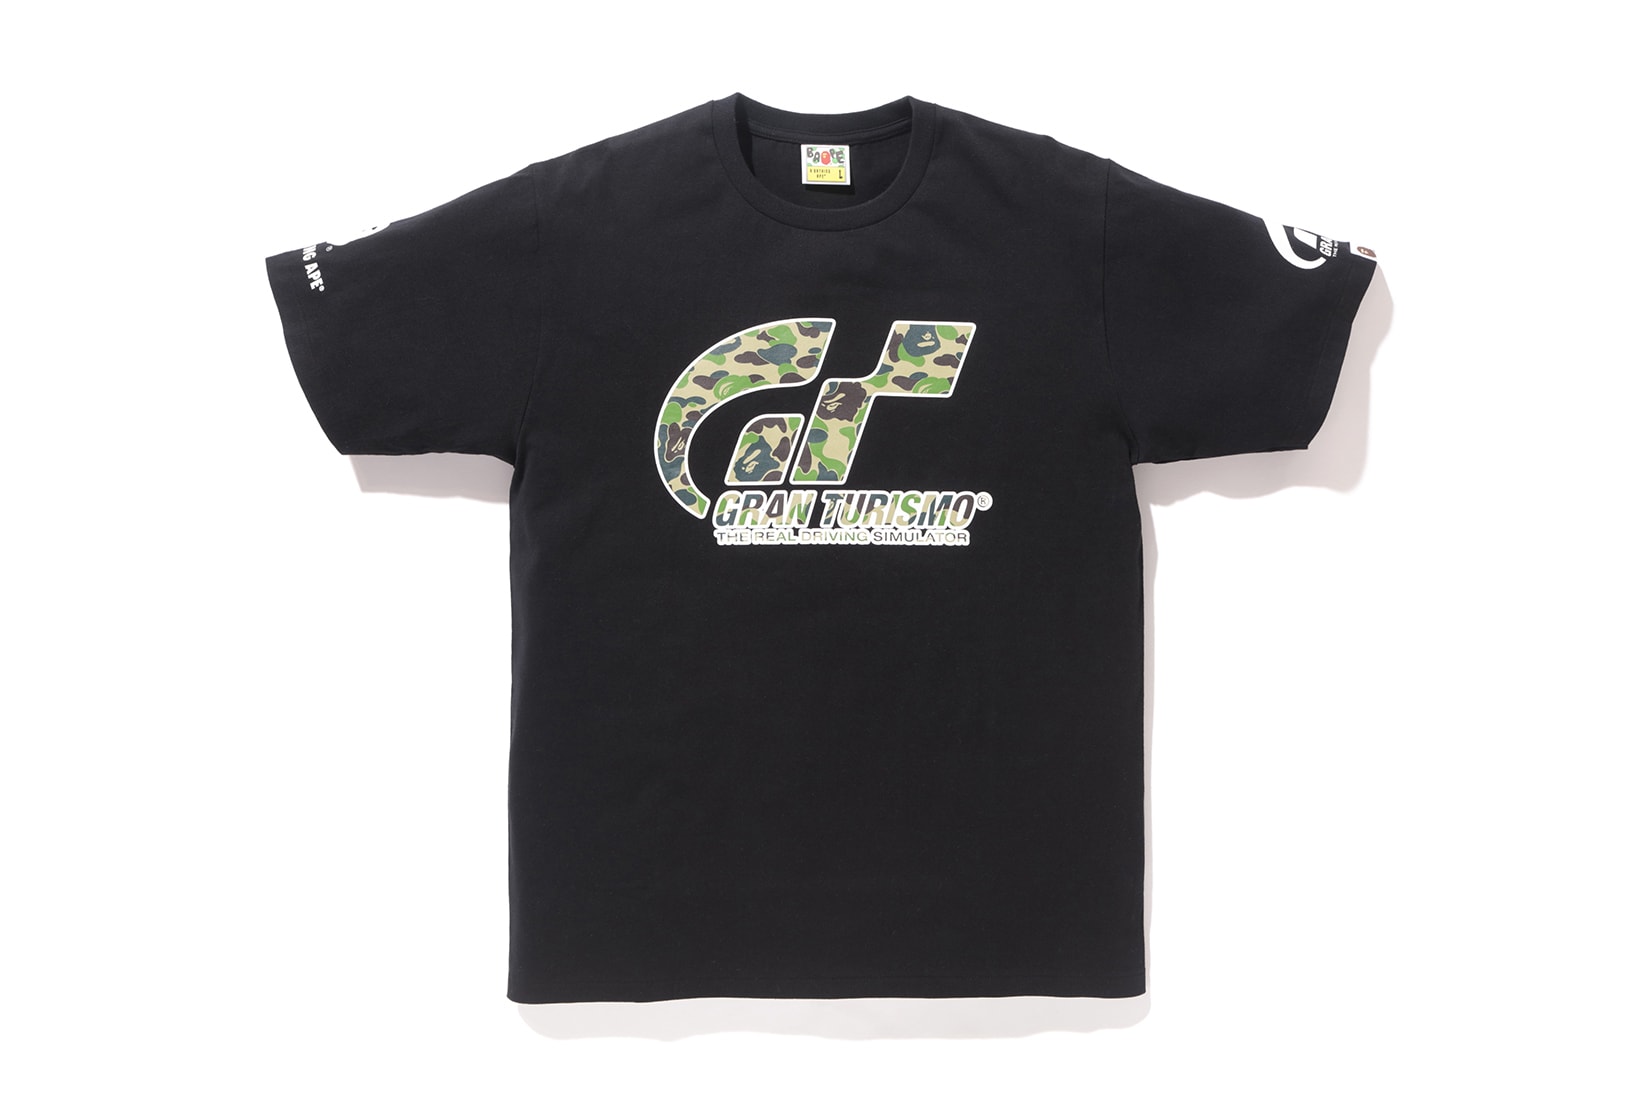 BAPE UNDEFEATED Gran Turismo Sport Collaboration A Bathing Ape UNDEFEATED Black White Grey T-shirt Hoodie Logo Branding California Sony Playstation